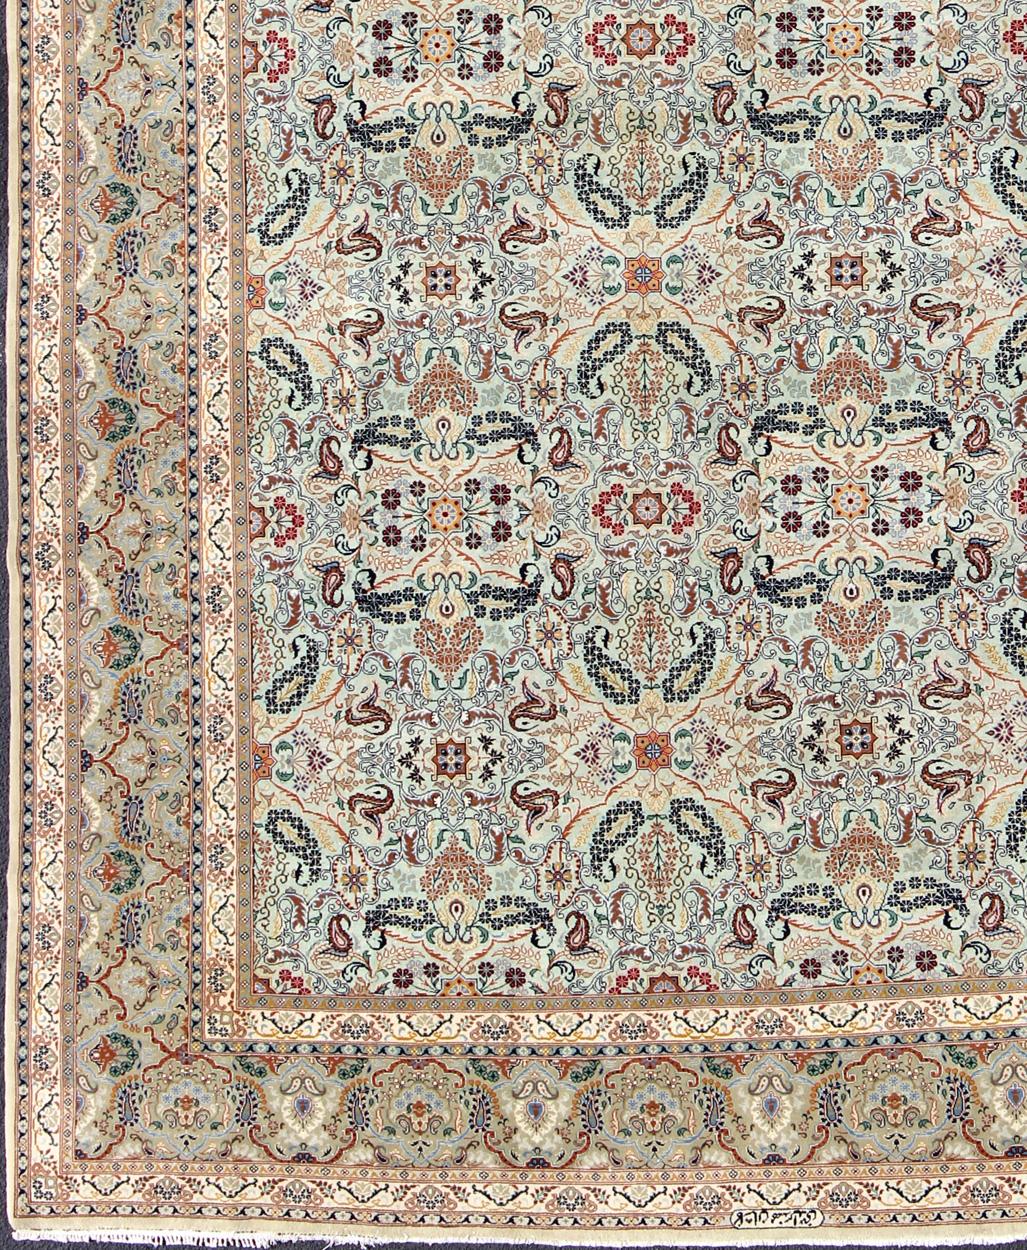 Persian Kashan rug with all-over blossom design, Keivan Woven Arts/rug /zir-4, country of origin / type: Iran / Kashan, circa 1940

Measures: 9' x 11'7

 Finely woven Persian Kashan filled with flowers, Paisleys Shrubs, arabesque, leaves, Intricate